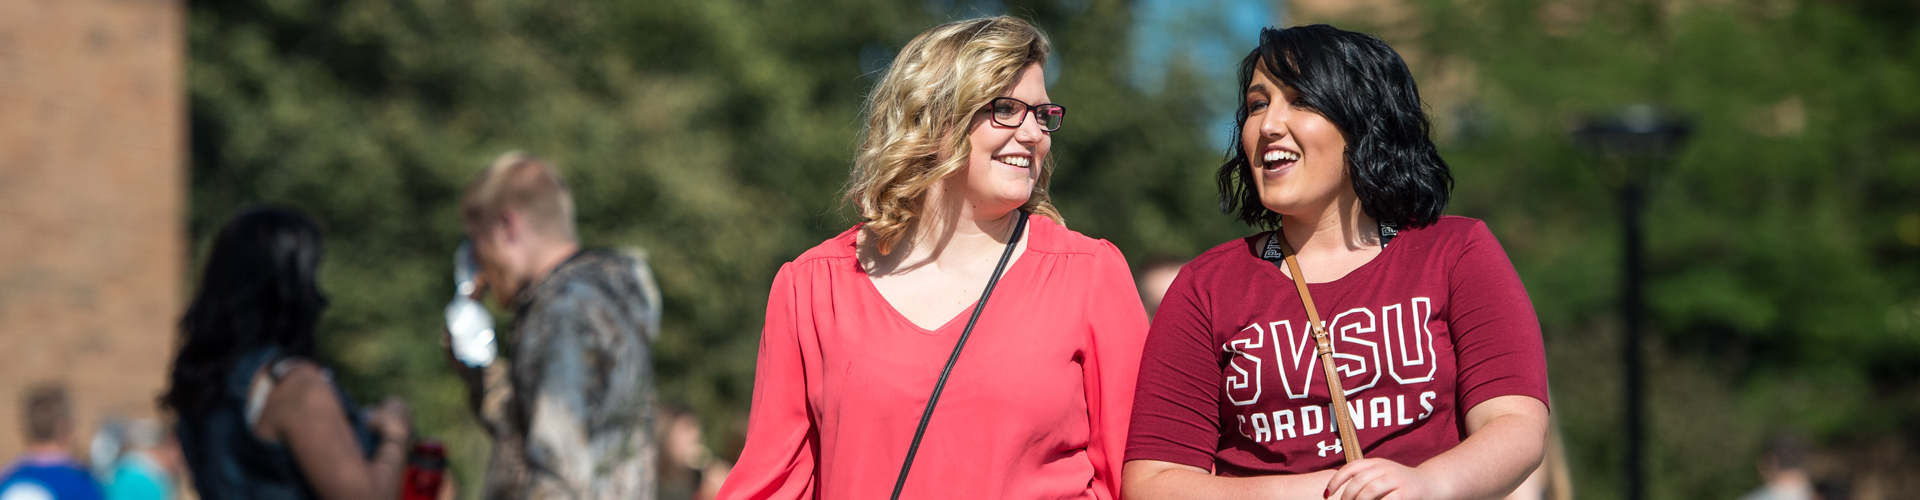  A pair of SVSU students walk together on campus